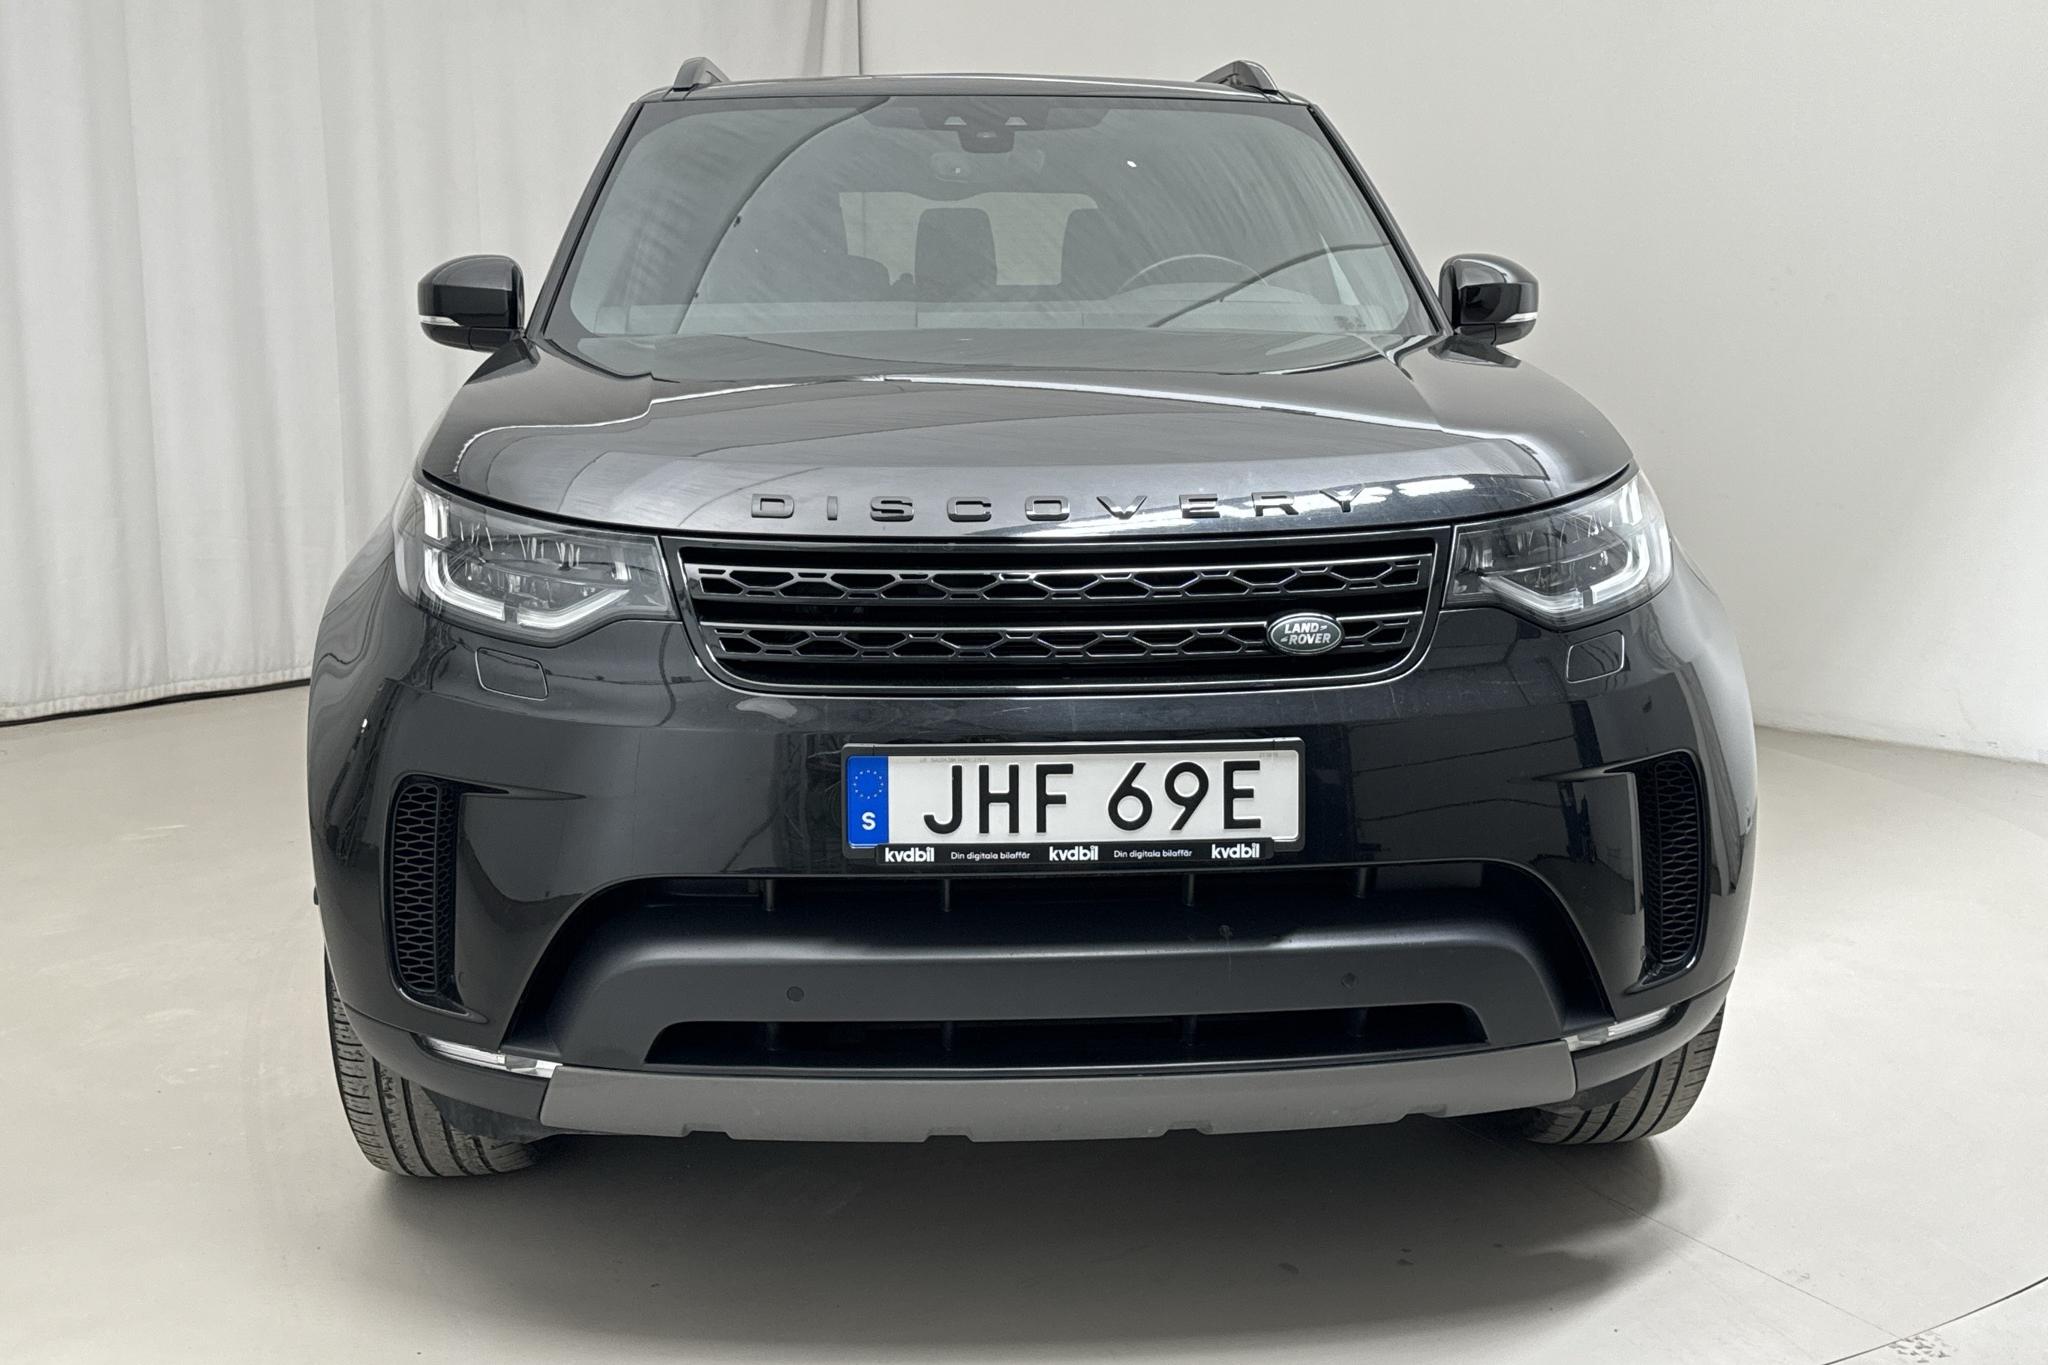 Land Rover Discovery 3.0L TD6 Diesel (258hk) - 100 400 km - Automatic - black - 2017